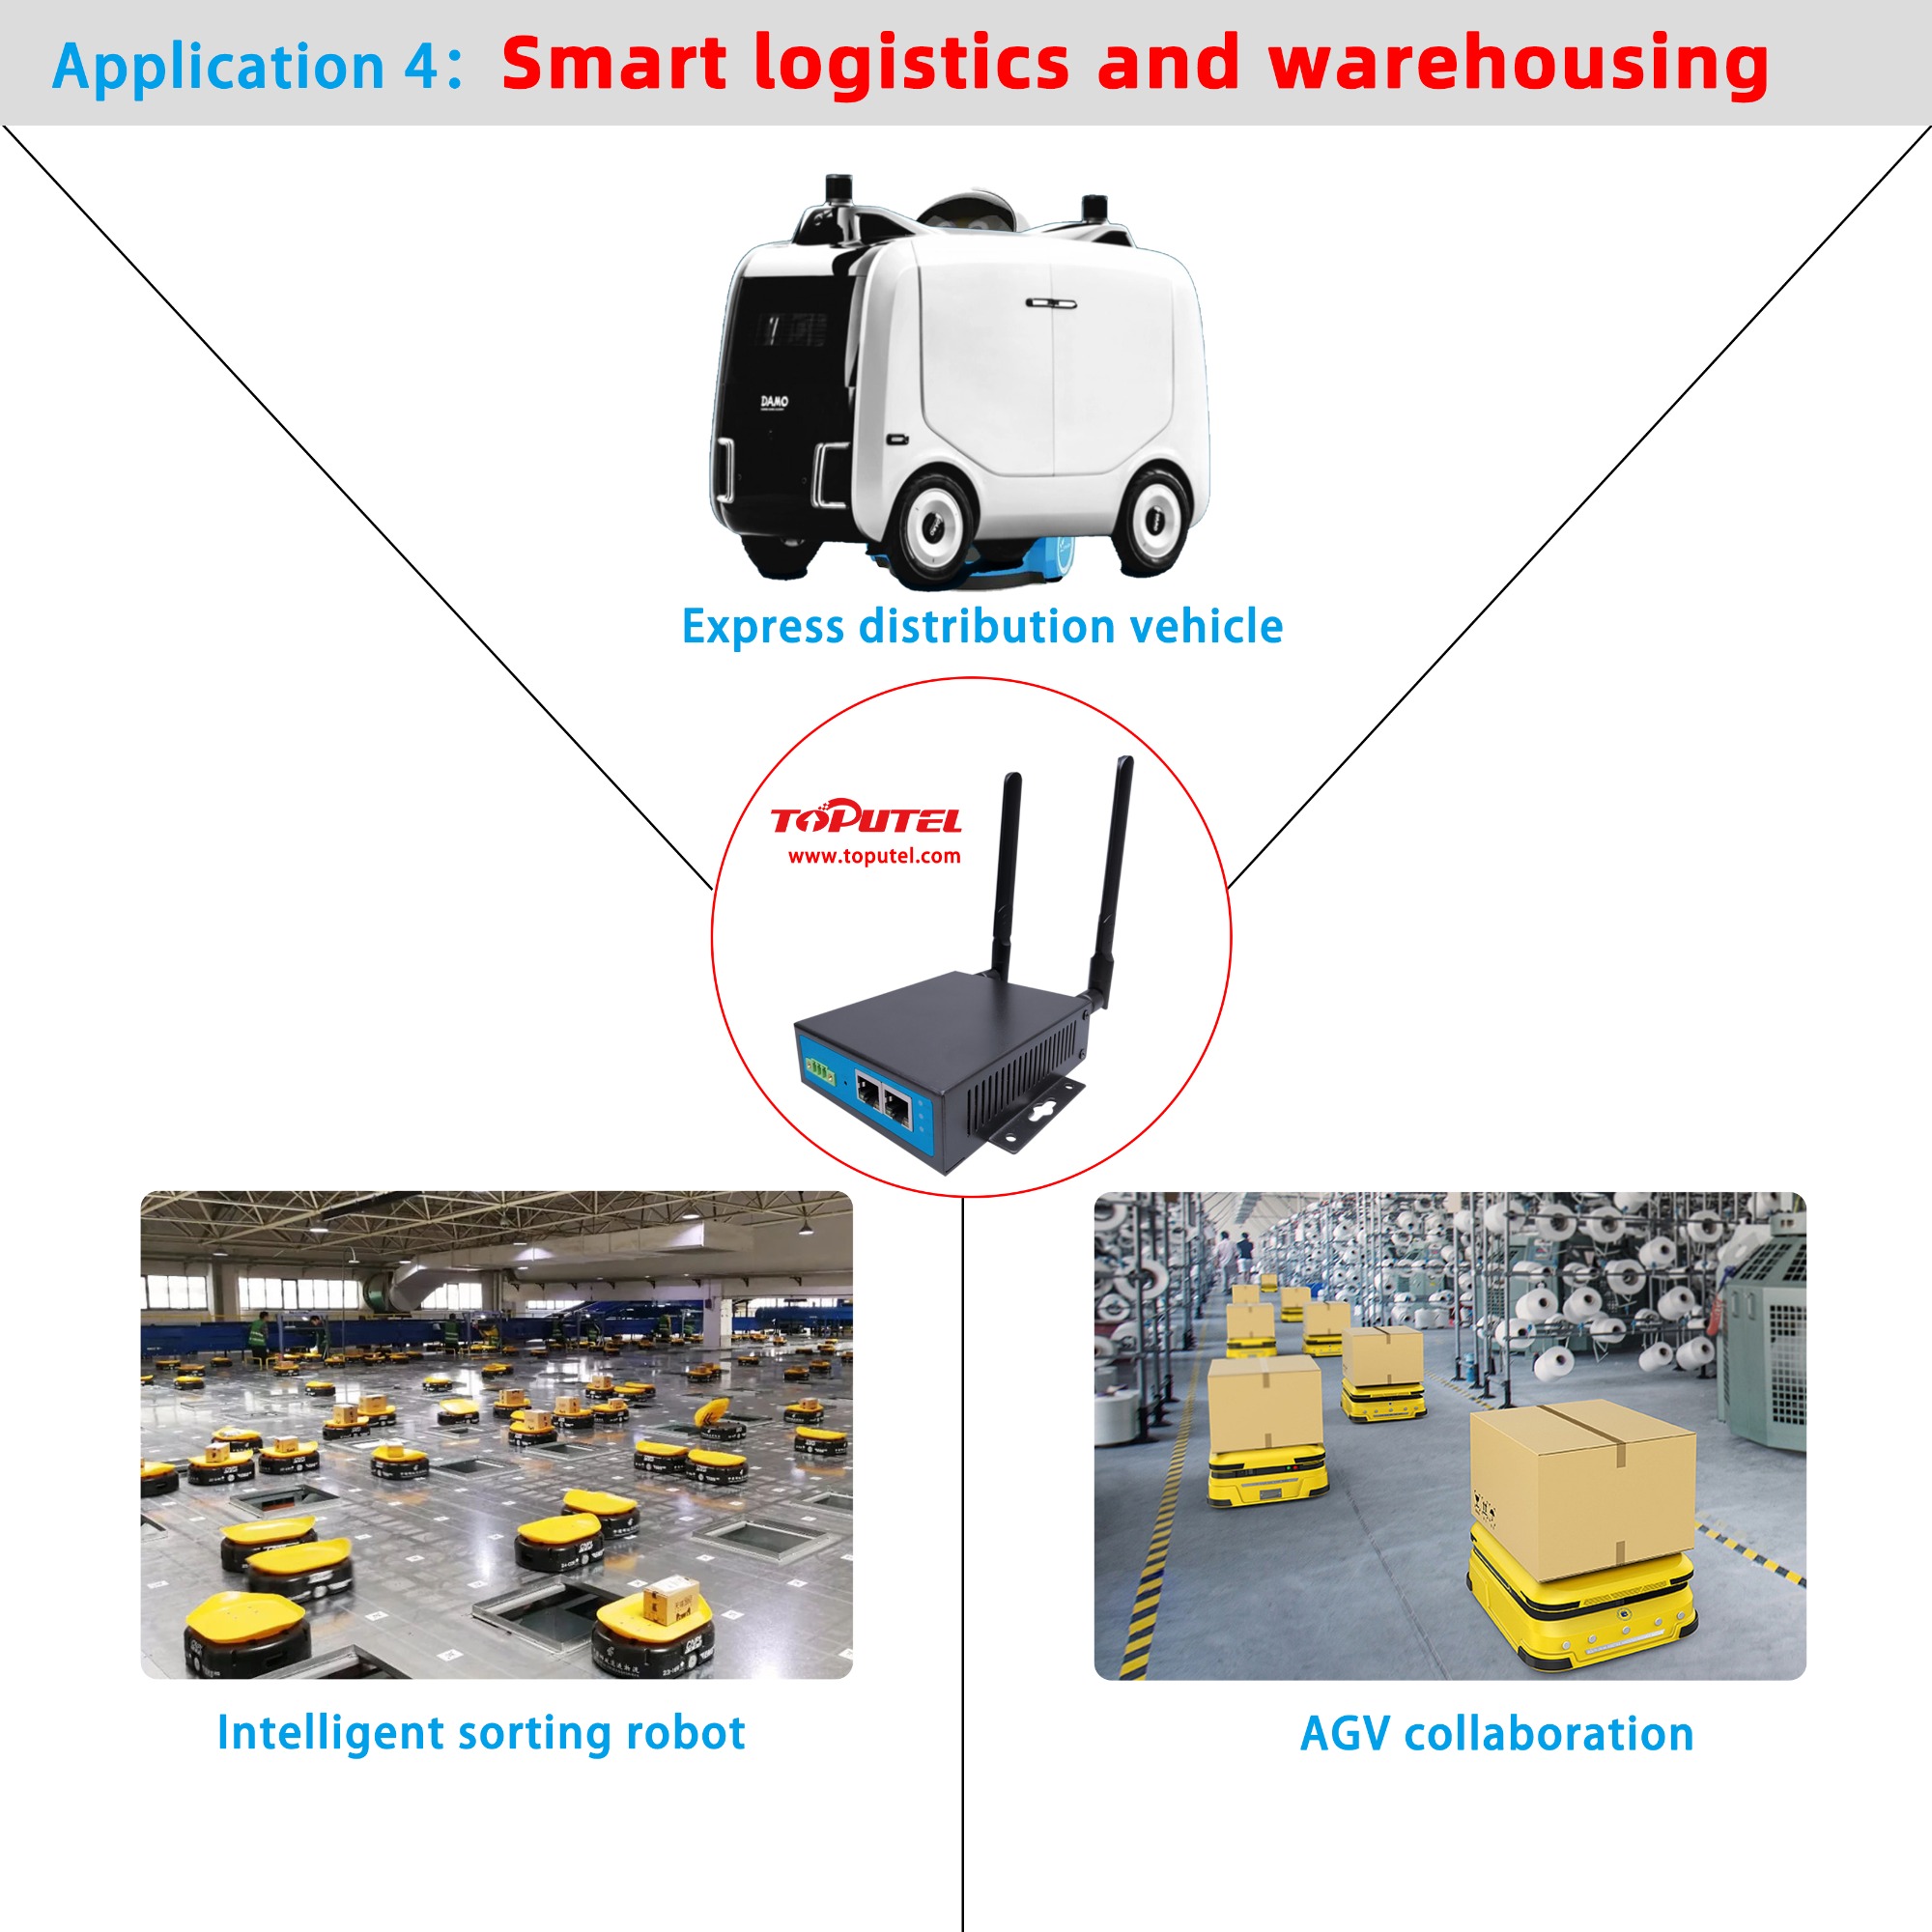 4G industrial router RG4000-E  product Application 4 ：Smart logistics and warehousing